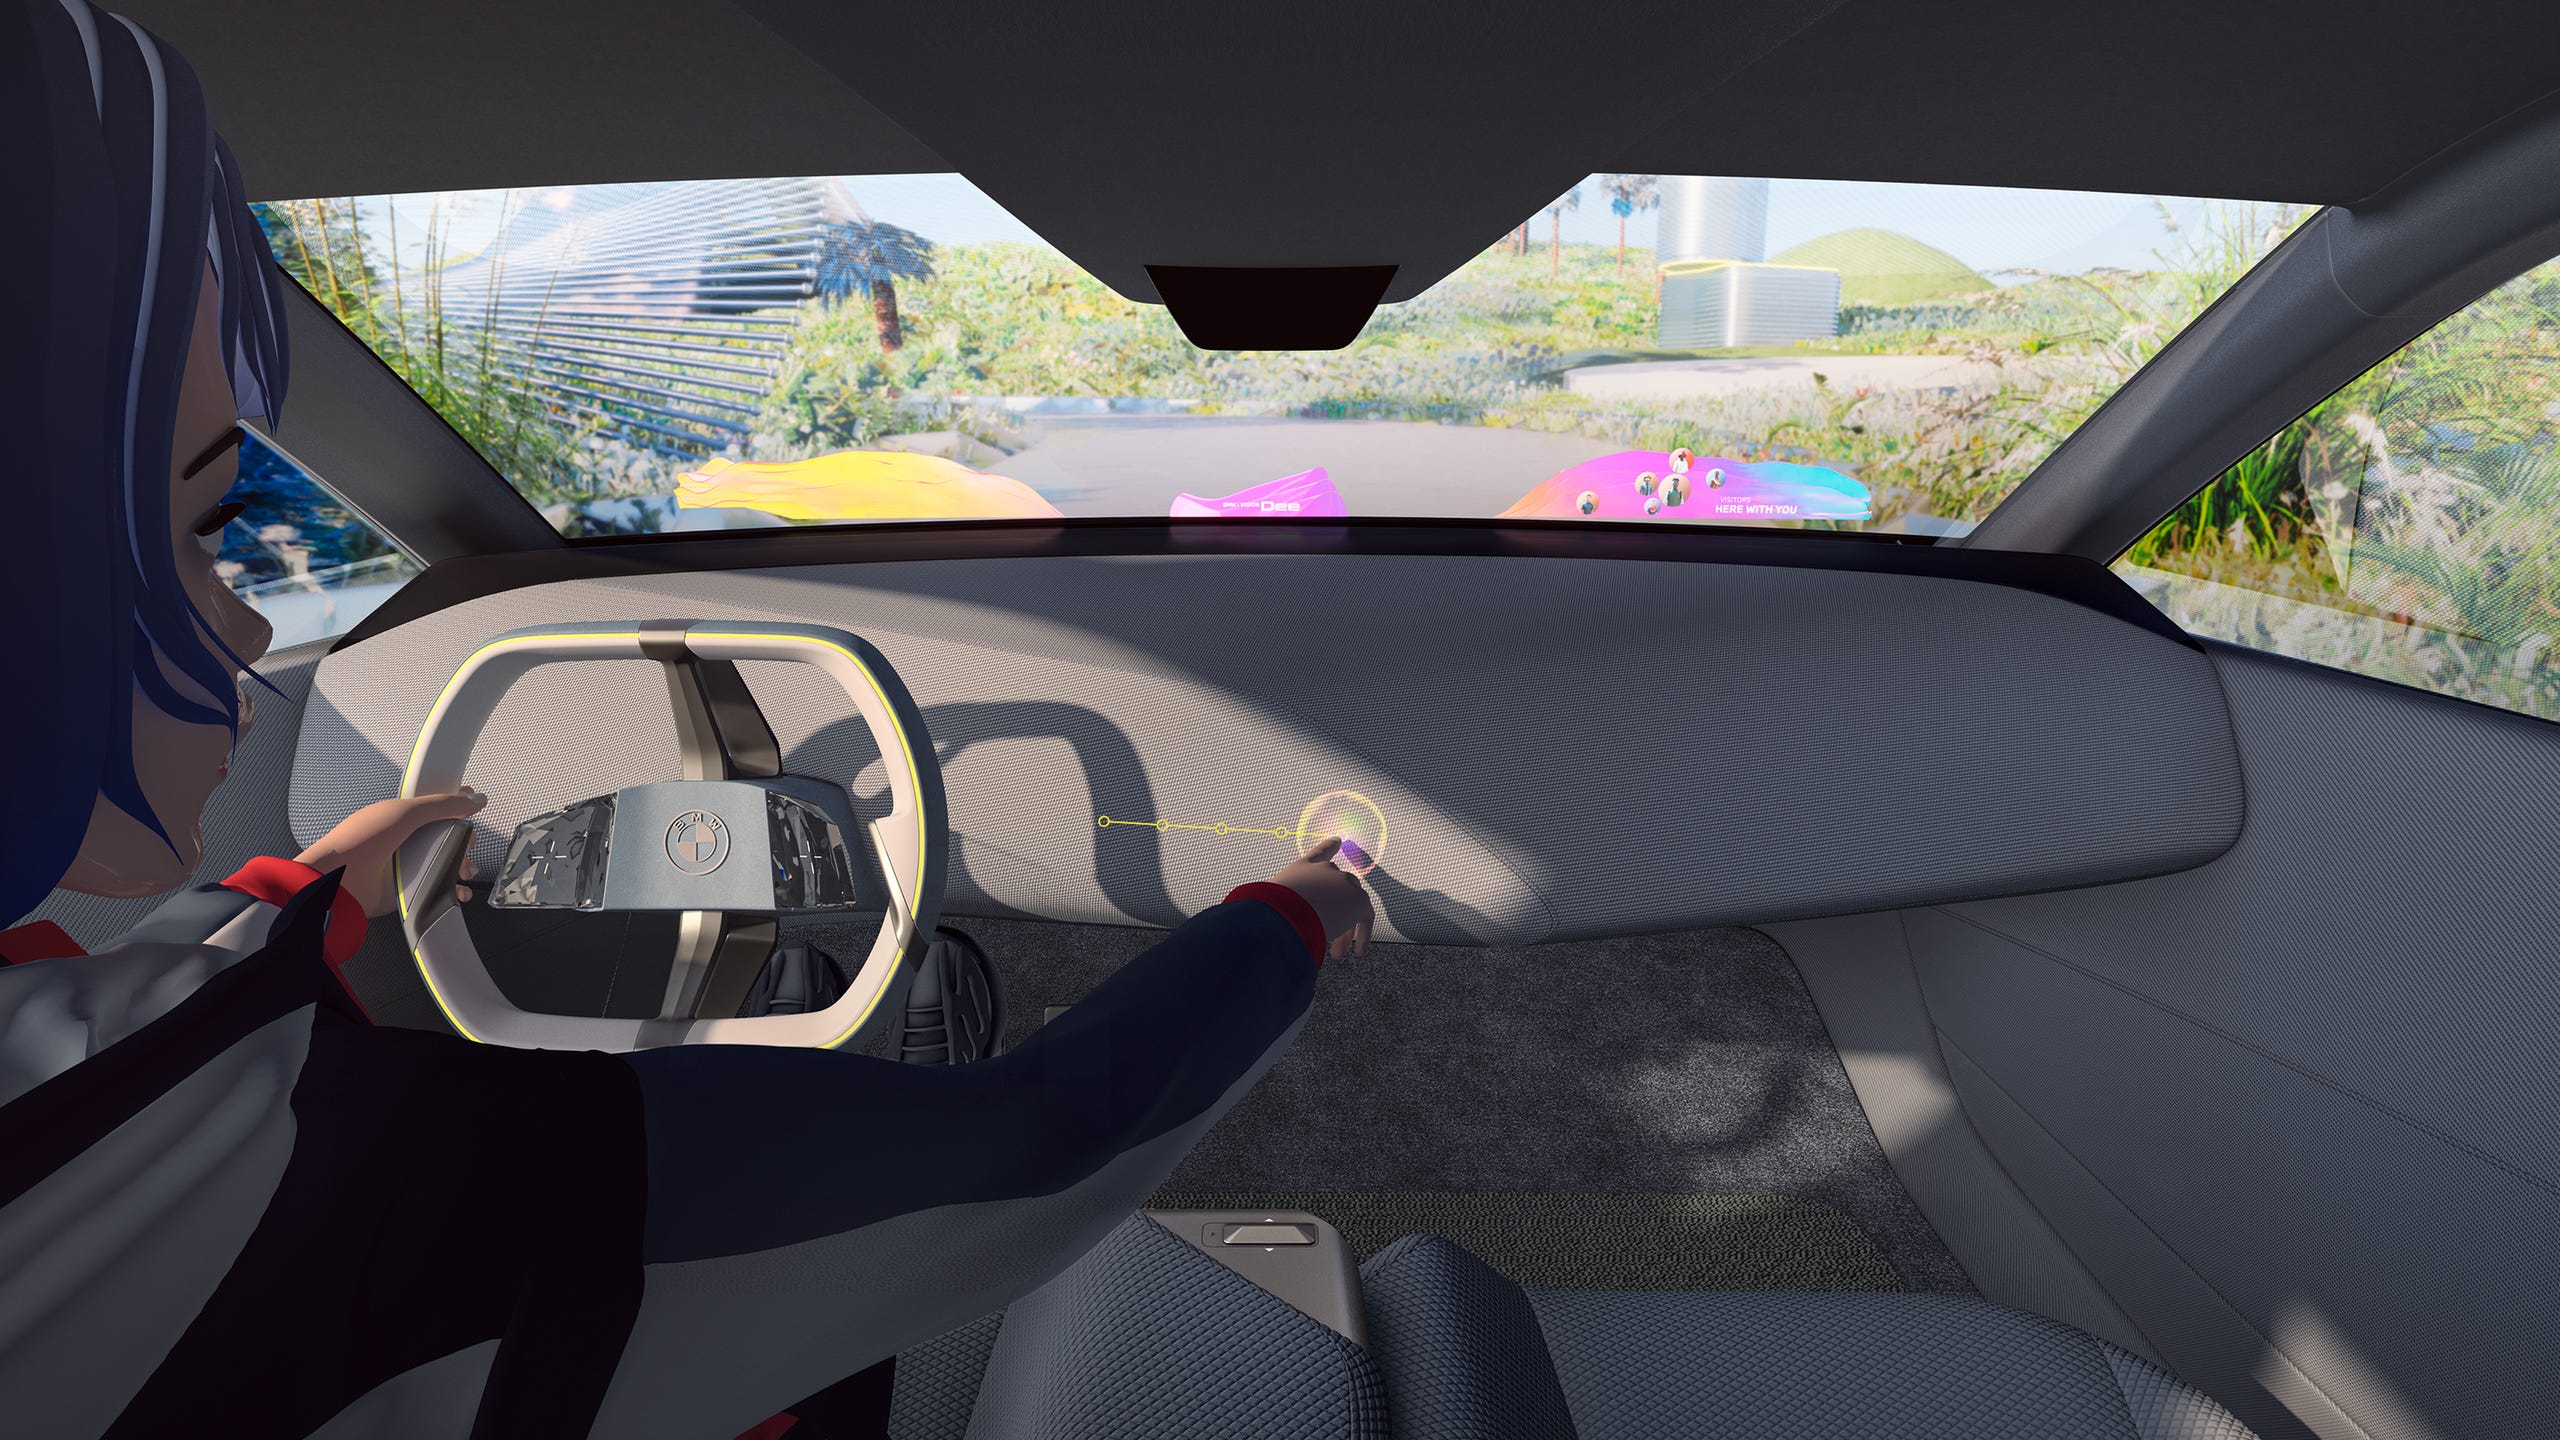 BMW's i Vision Dee concept imagines a virtual world displayed on the windshield and windows with its five-step mixed reality slider.